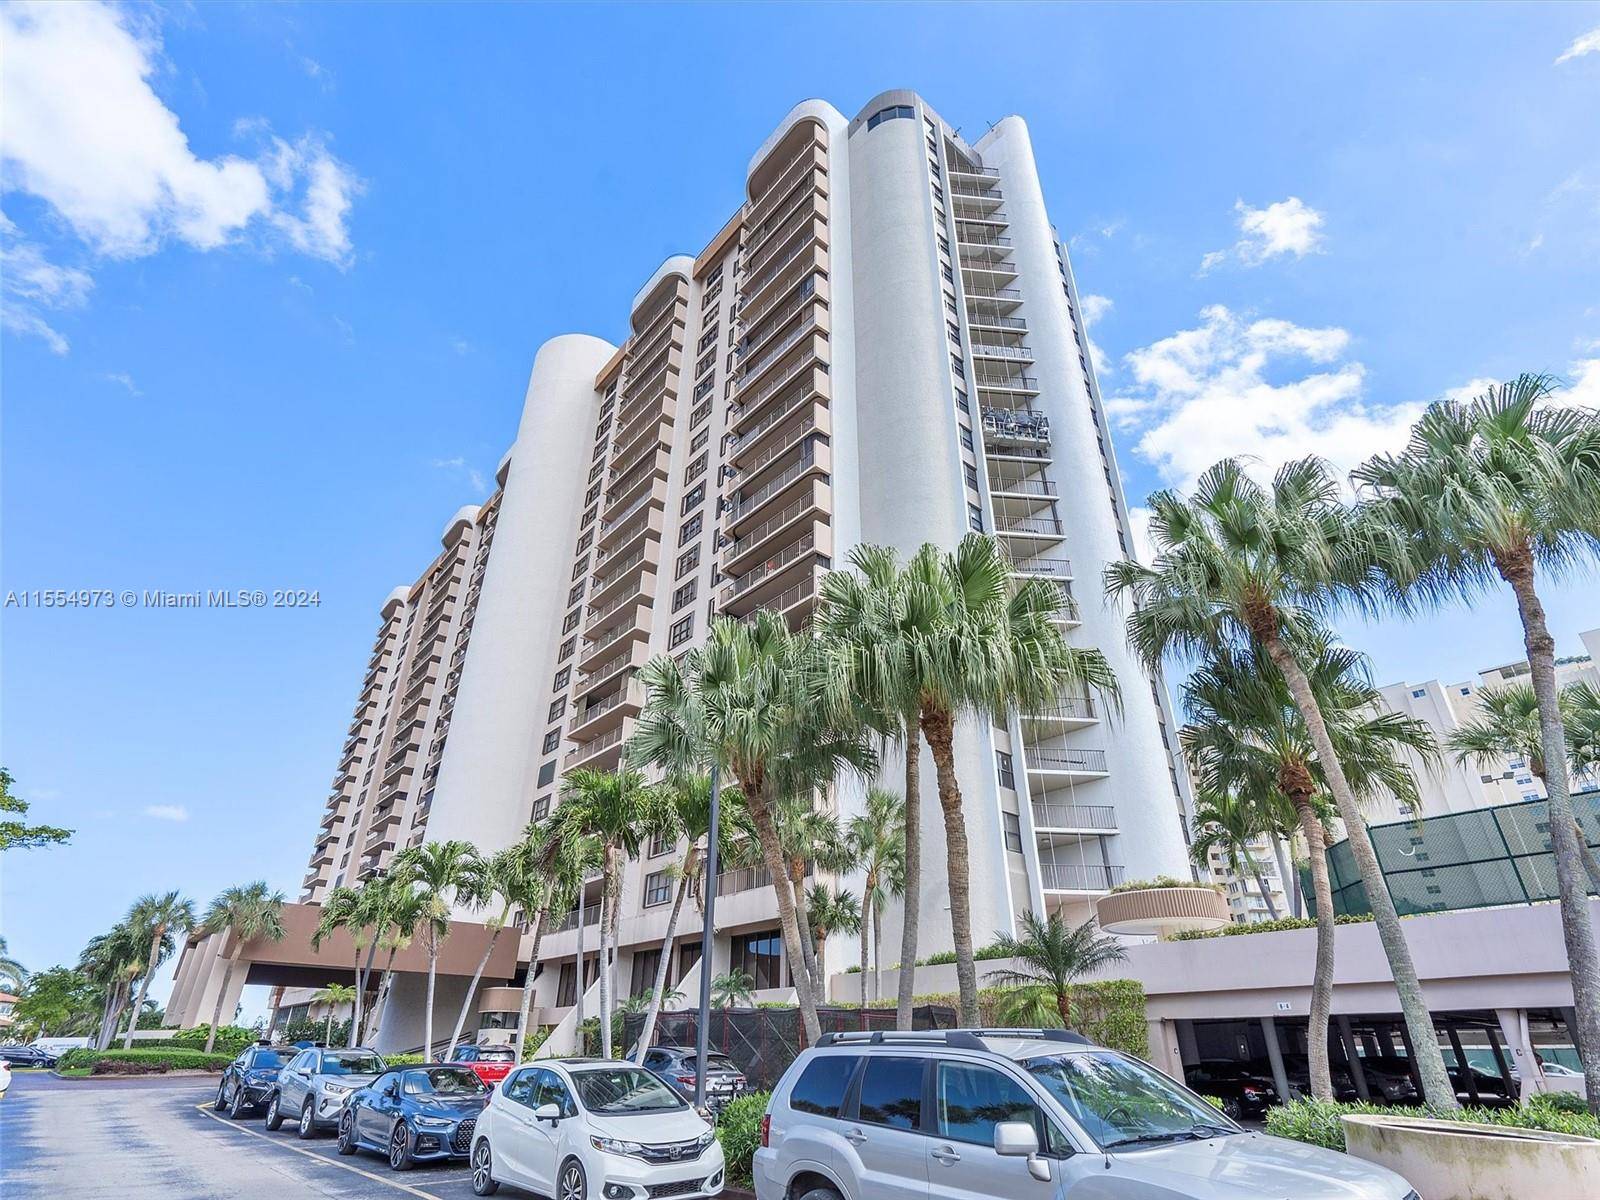 Savor the serenity of waterfront living in this spacious 2beds, 2 baths unit, boasting 1, 460 soft of comfortable living space.